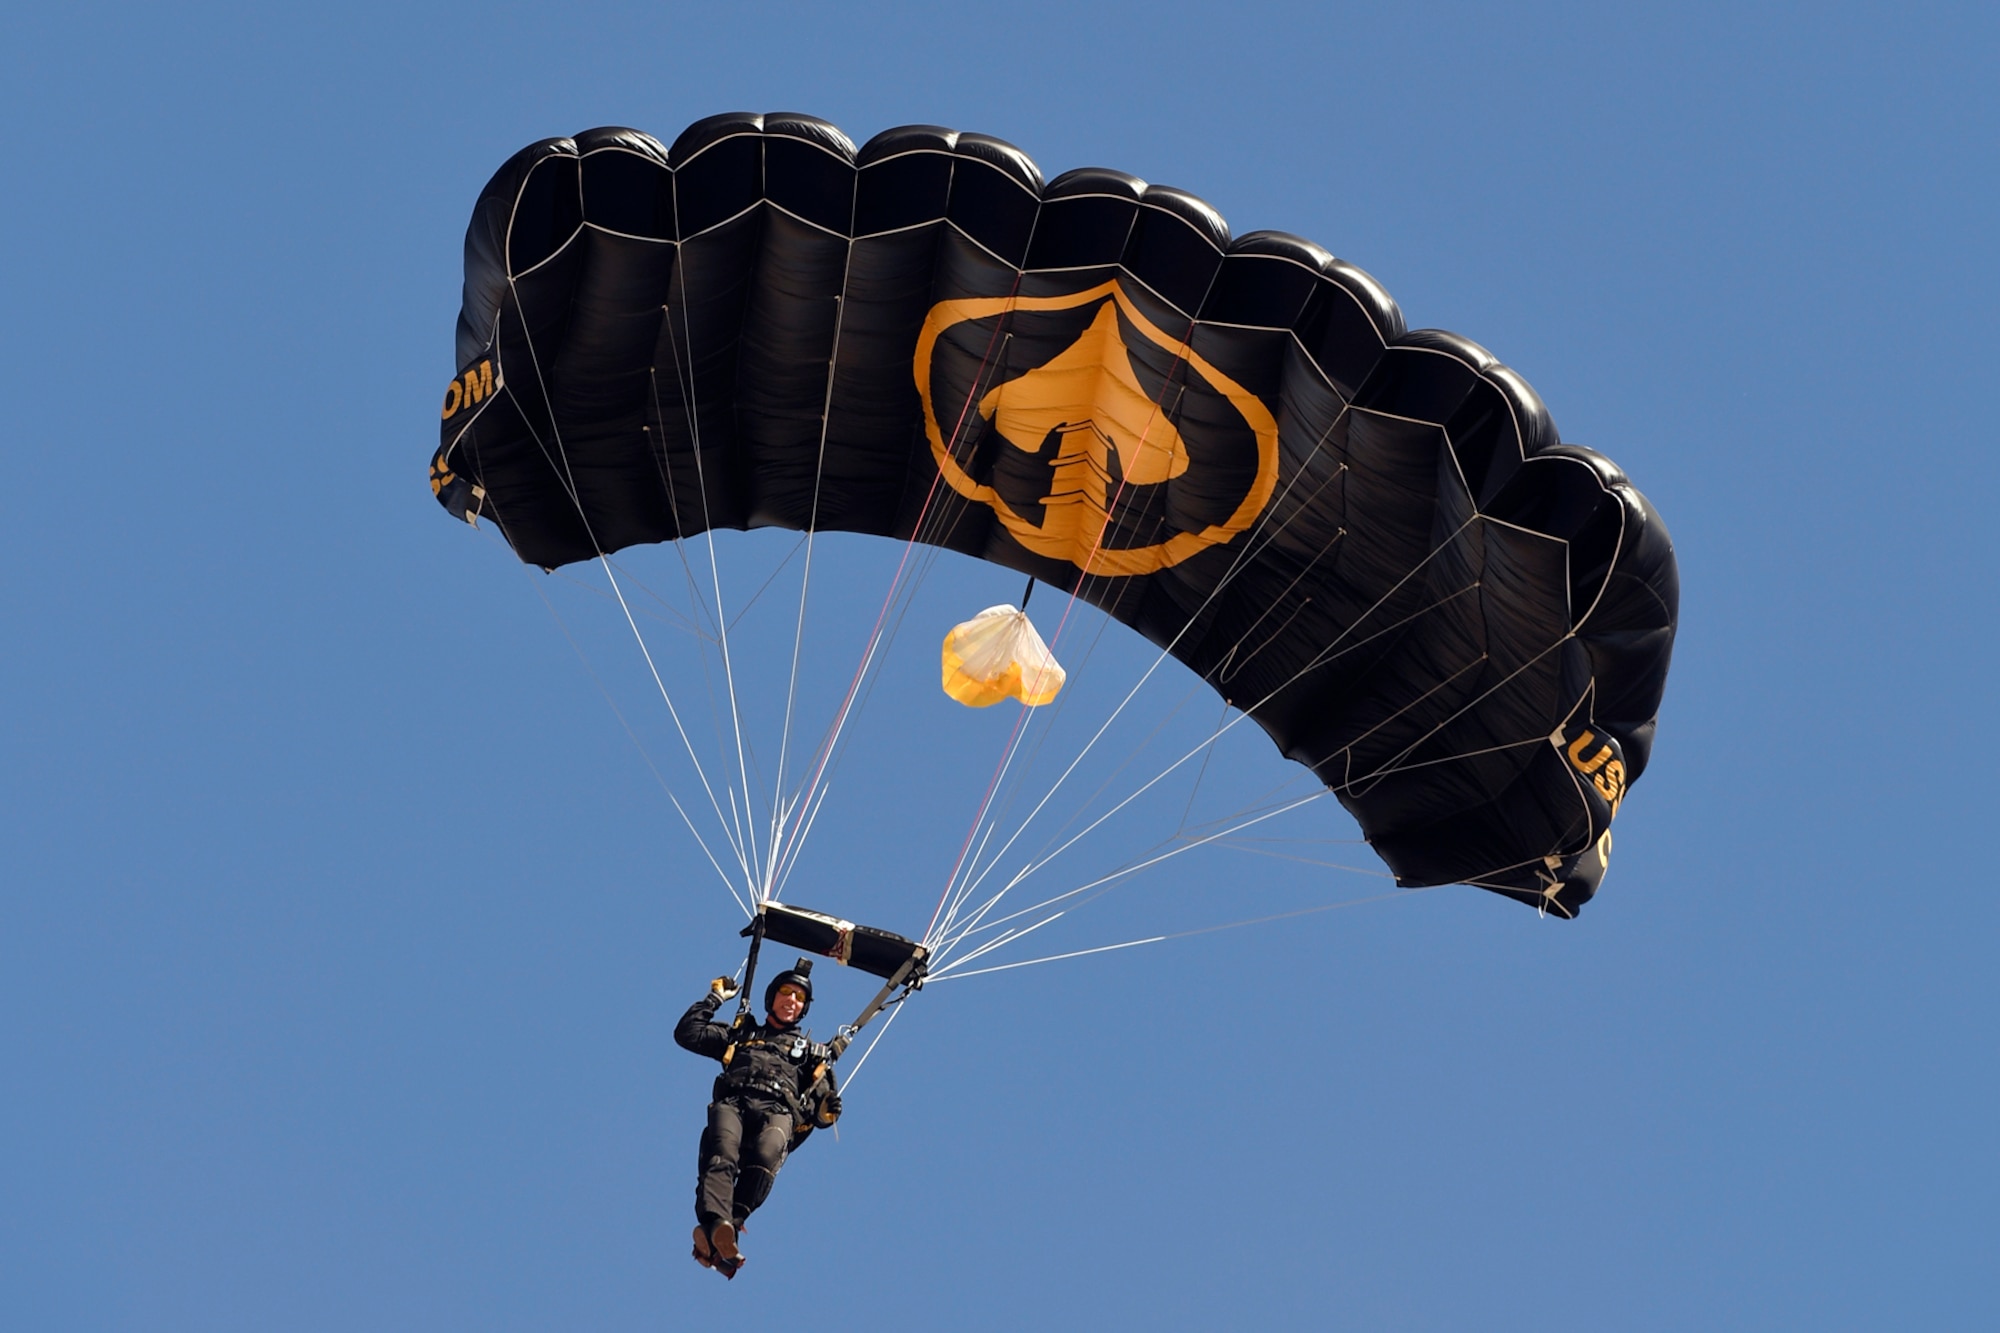 A U.S. Special Operations Command The Para-Commandos parachute demonstration team member parachutes to the ground during the Warriors Over the Wasatch Air and Space Show June 24, 2018, at Hill Air Force Base, Utah. The Para-Commandos are comprised of active duty special operators, such as Army Special Forces, Army Rangers, Navy SEALs, Air Force Combat Controllers and Marine Raiders. (U.S. Air Force photo by Todd Cromar)